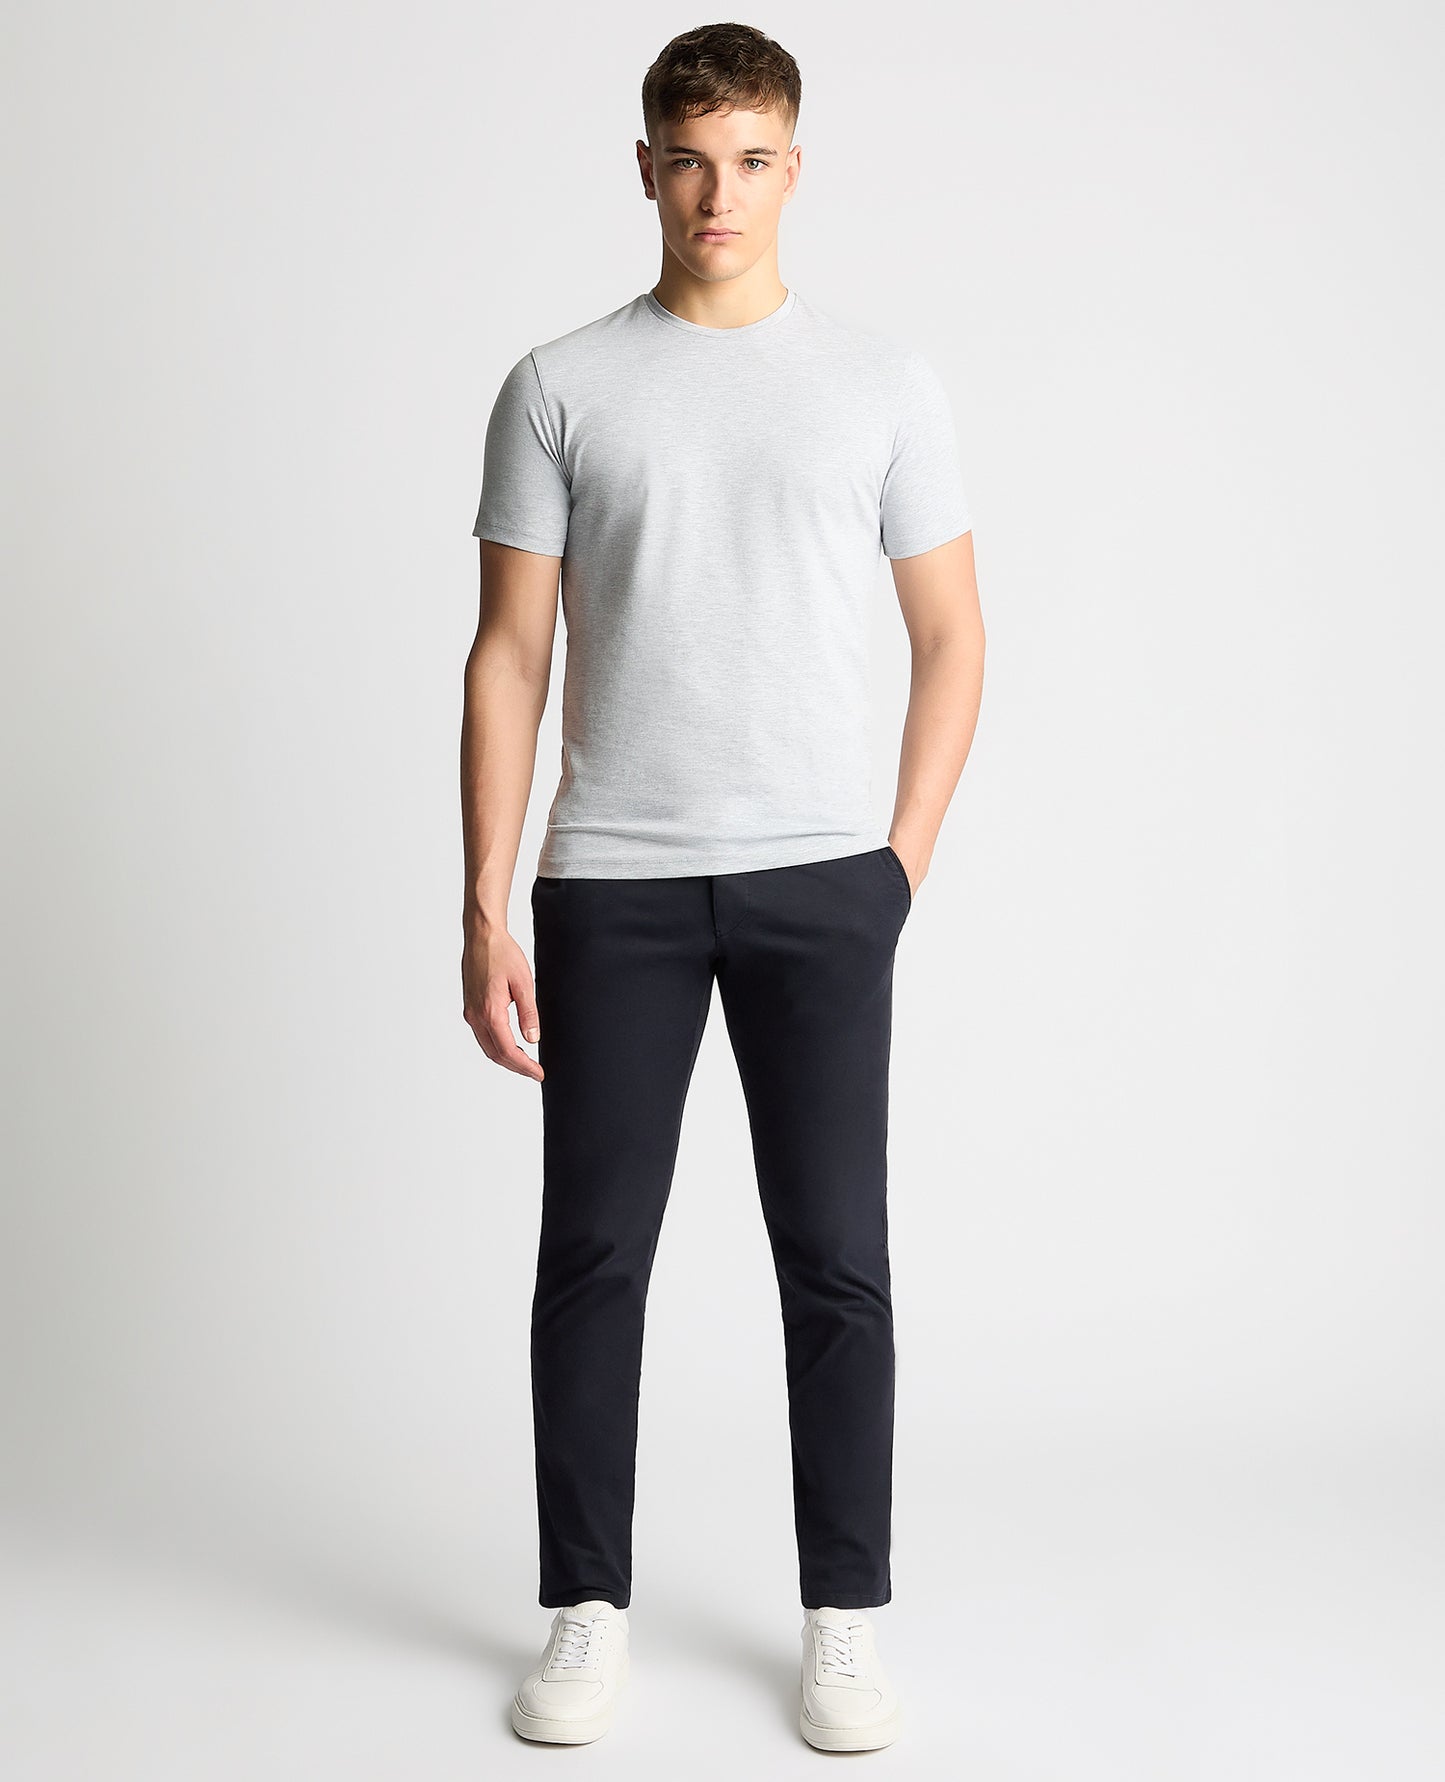 Remus Uomo Tapered Fit Grey Cotton T-Shirt